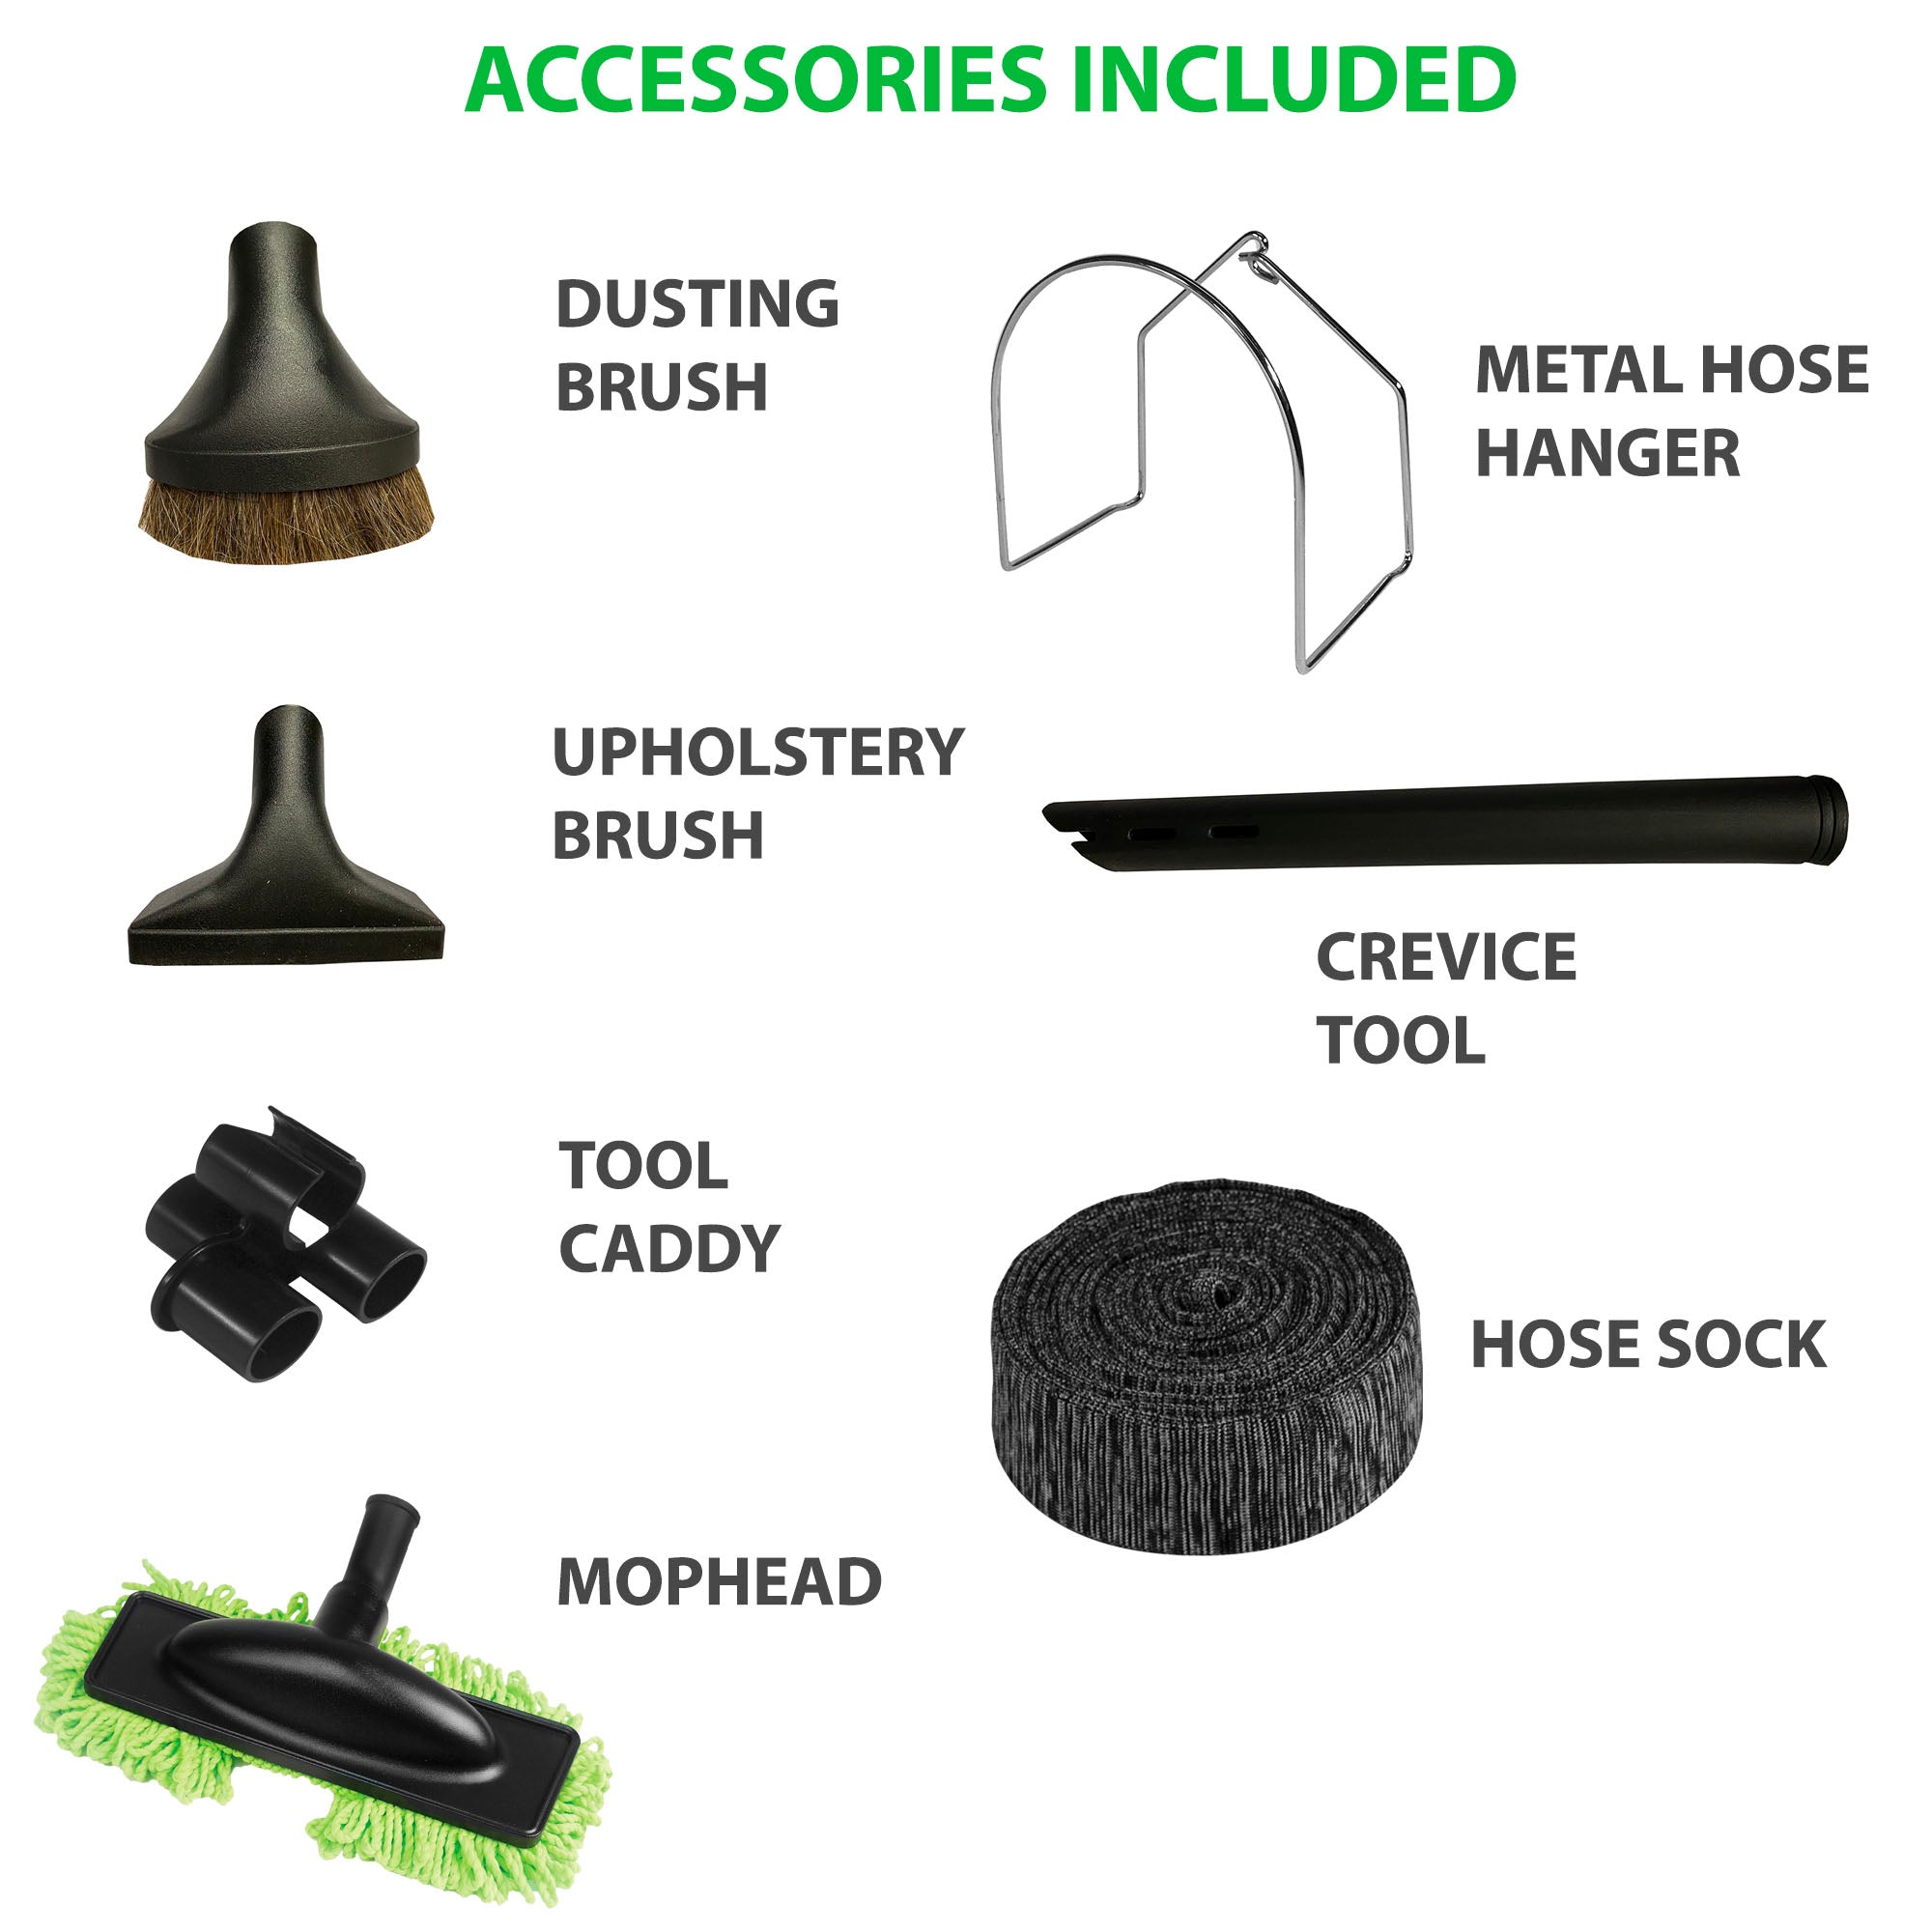 Central Vacuum Accessory Kit - Accessories Included